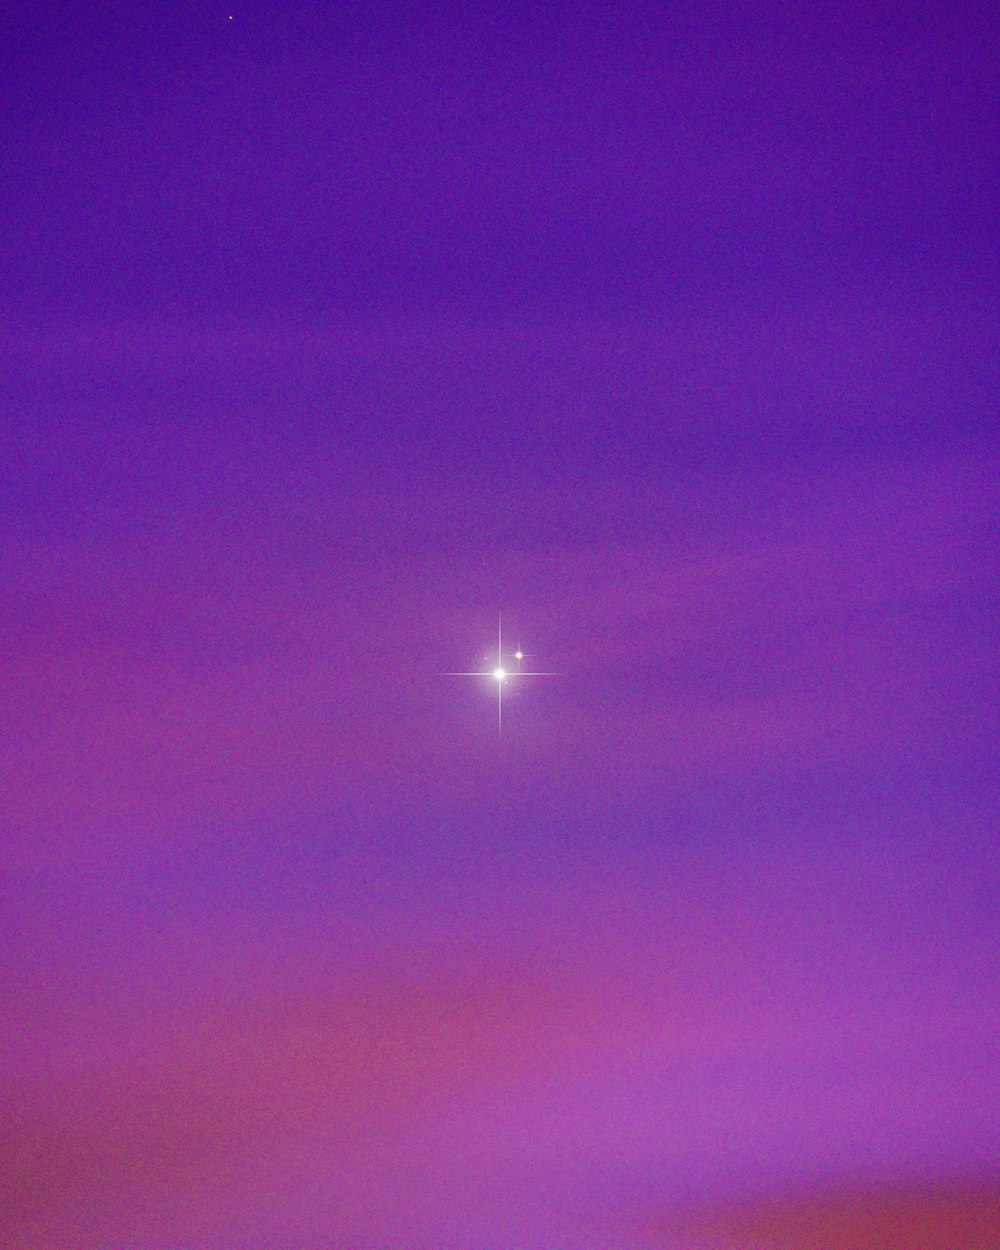 purple and blue sky with stars